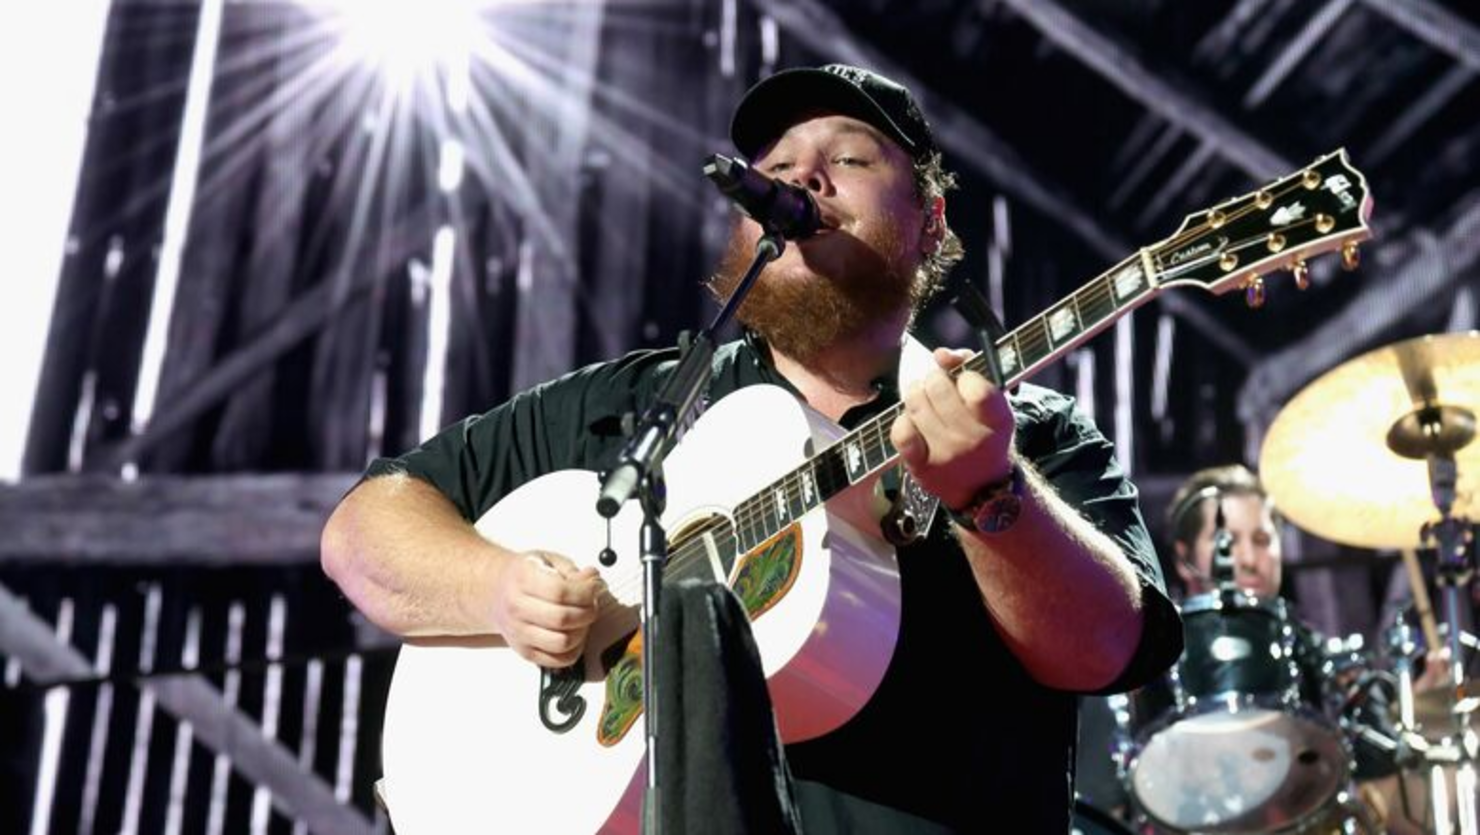 Luke Combs Brings Stadium To Tears With Performance Dedicated To Young Boy